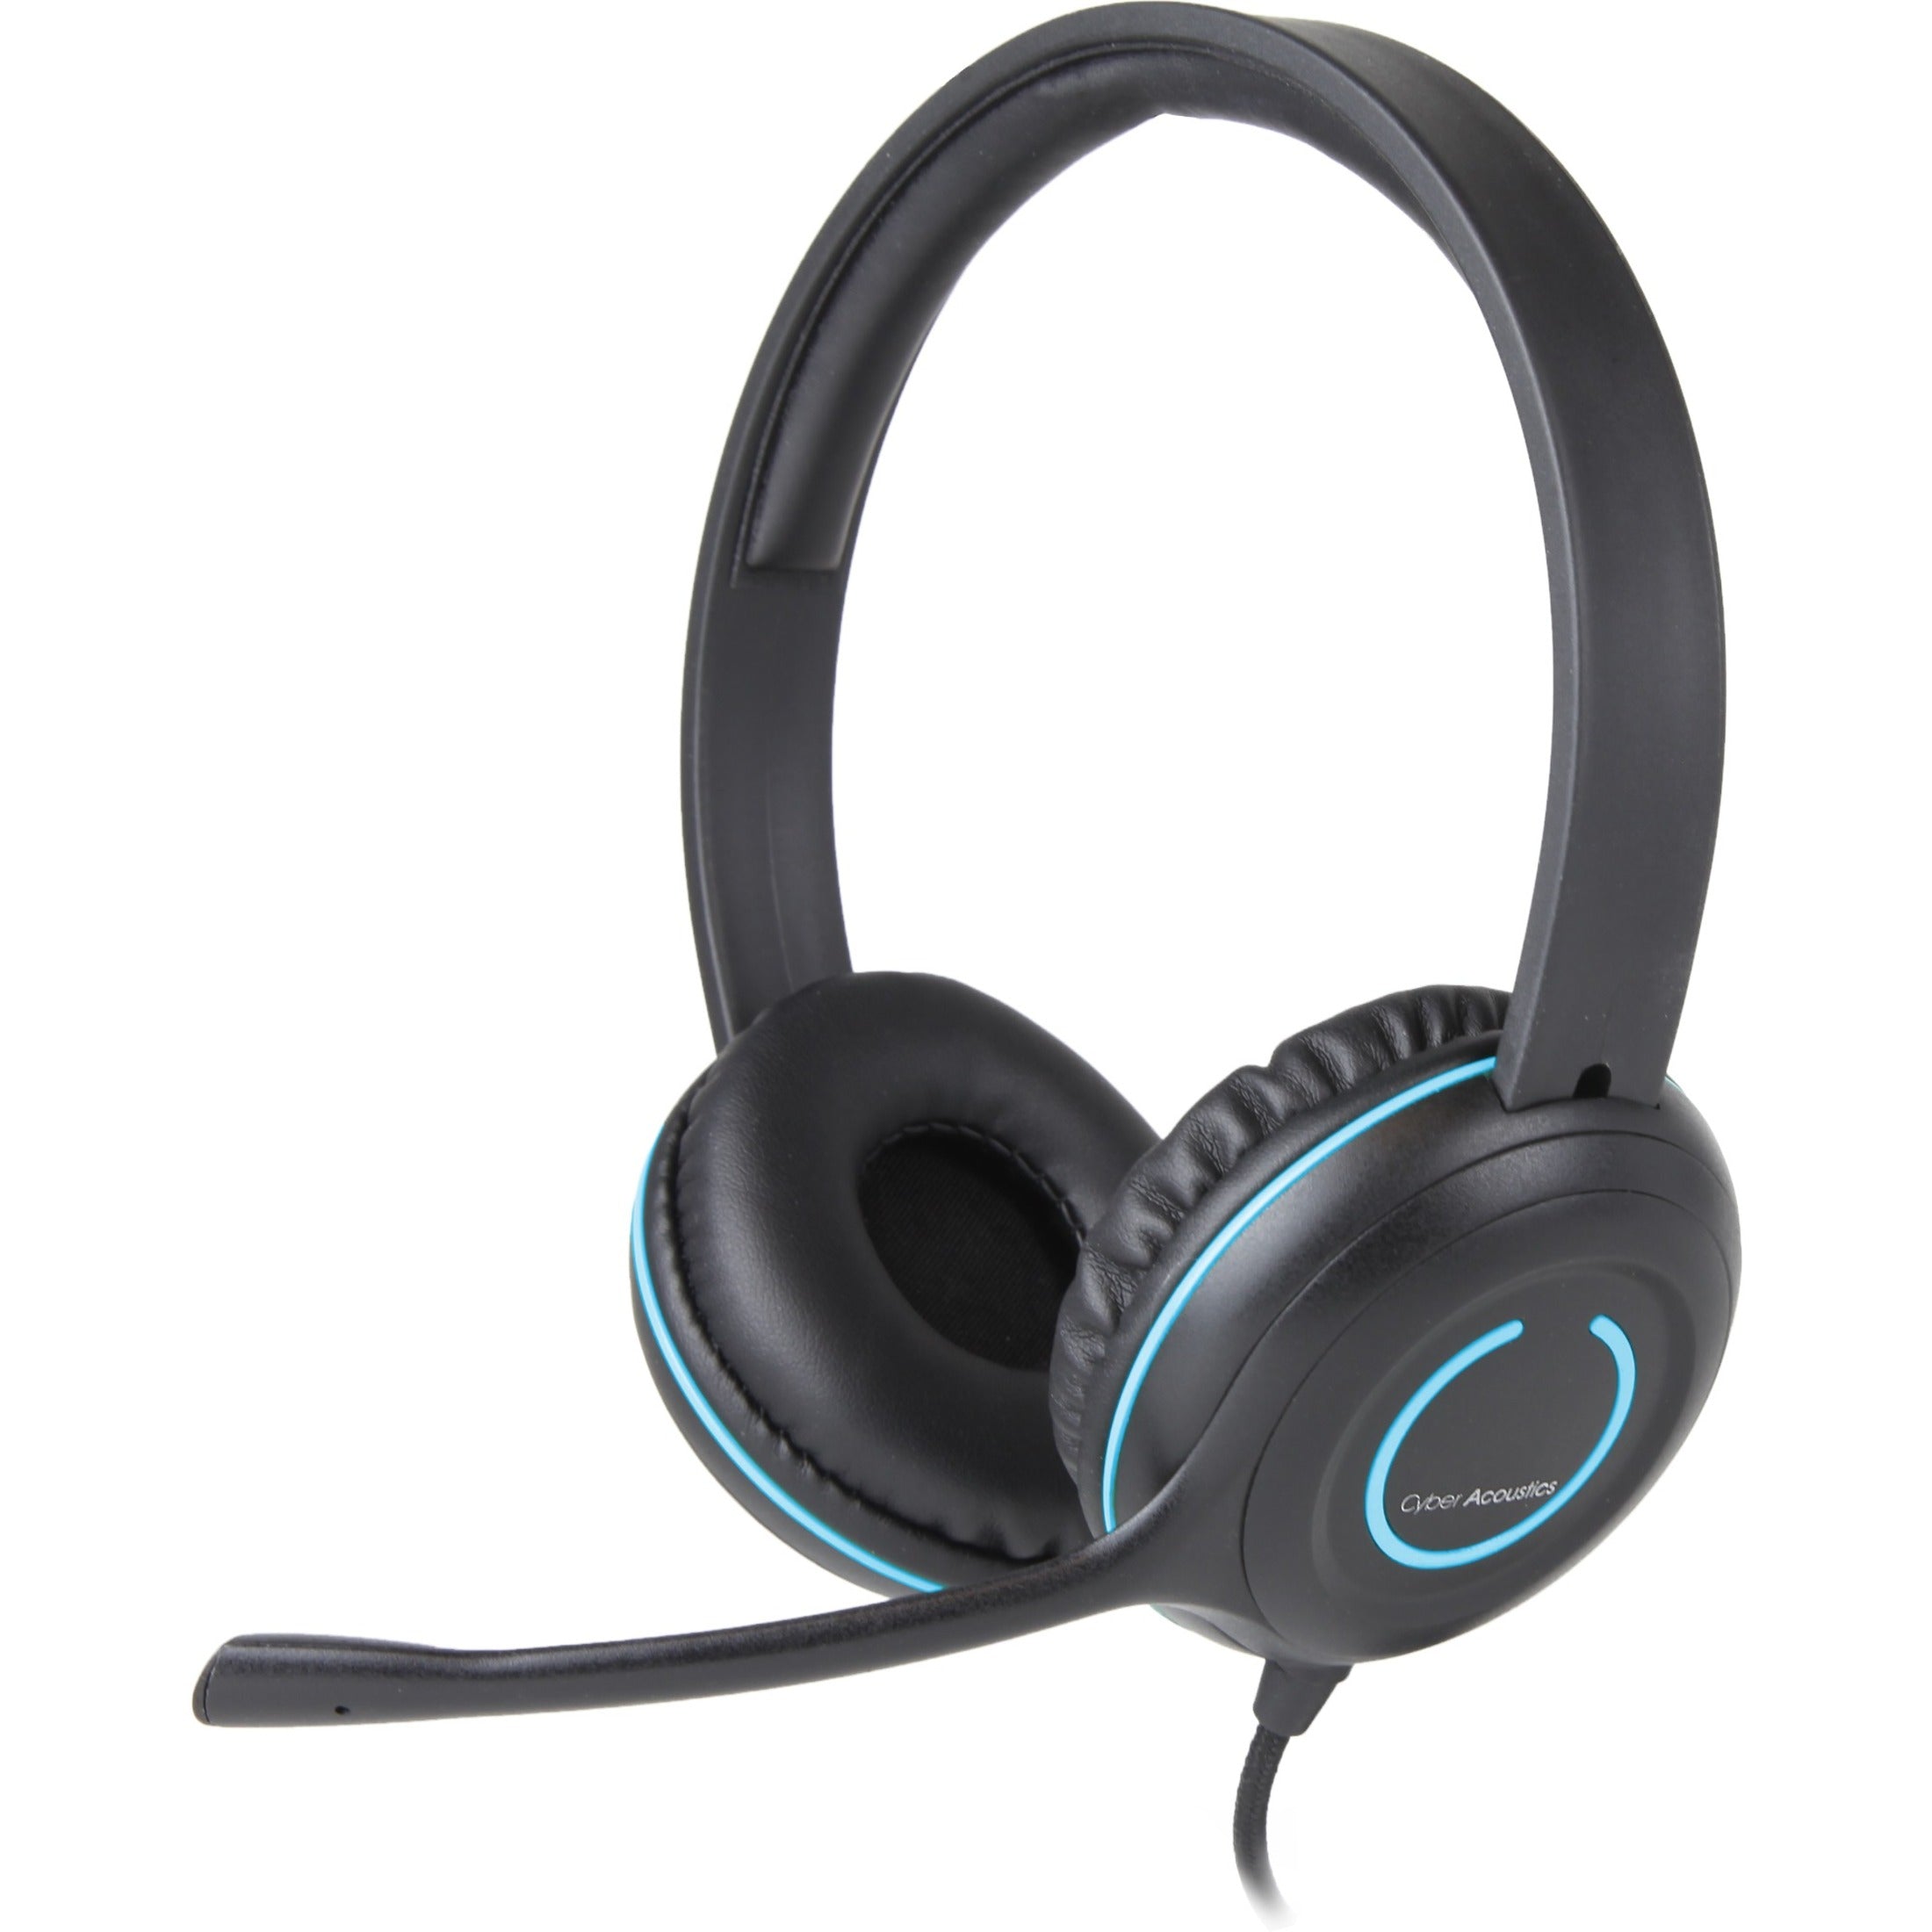 Cyber Acoustics AC-5008 USB Stereo Headset, Durable, Adjustable Headband, Noise Cancelling